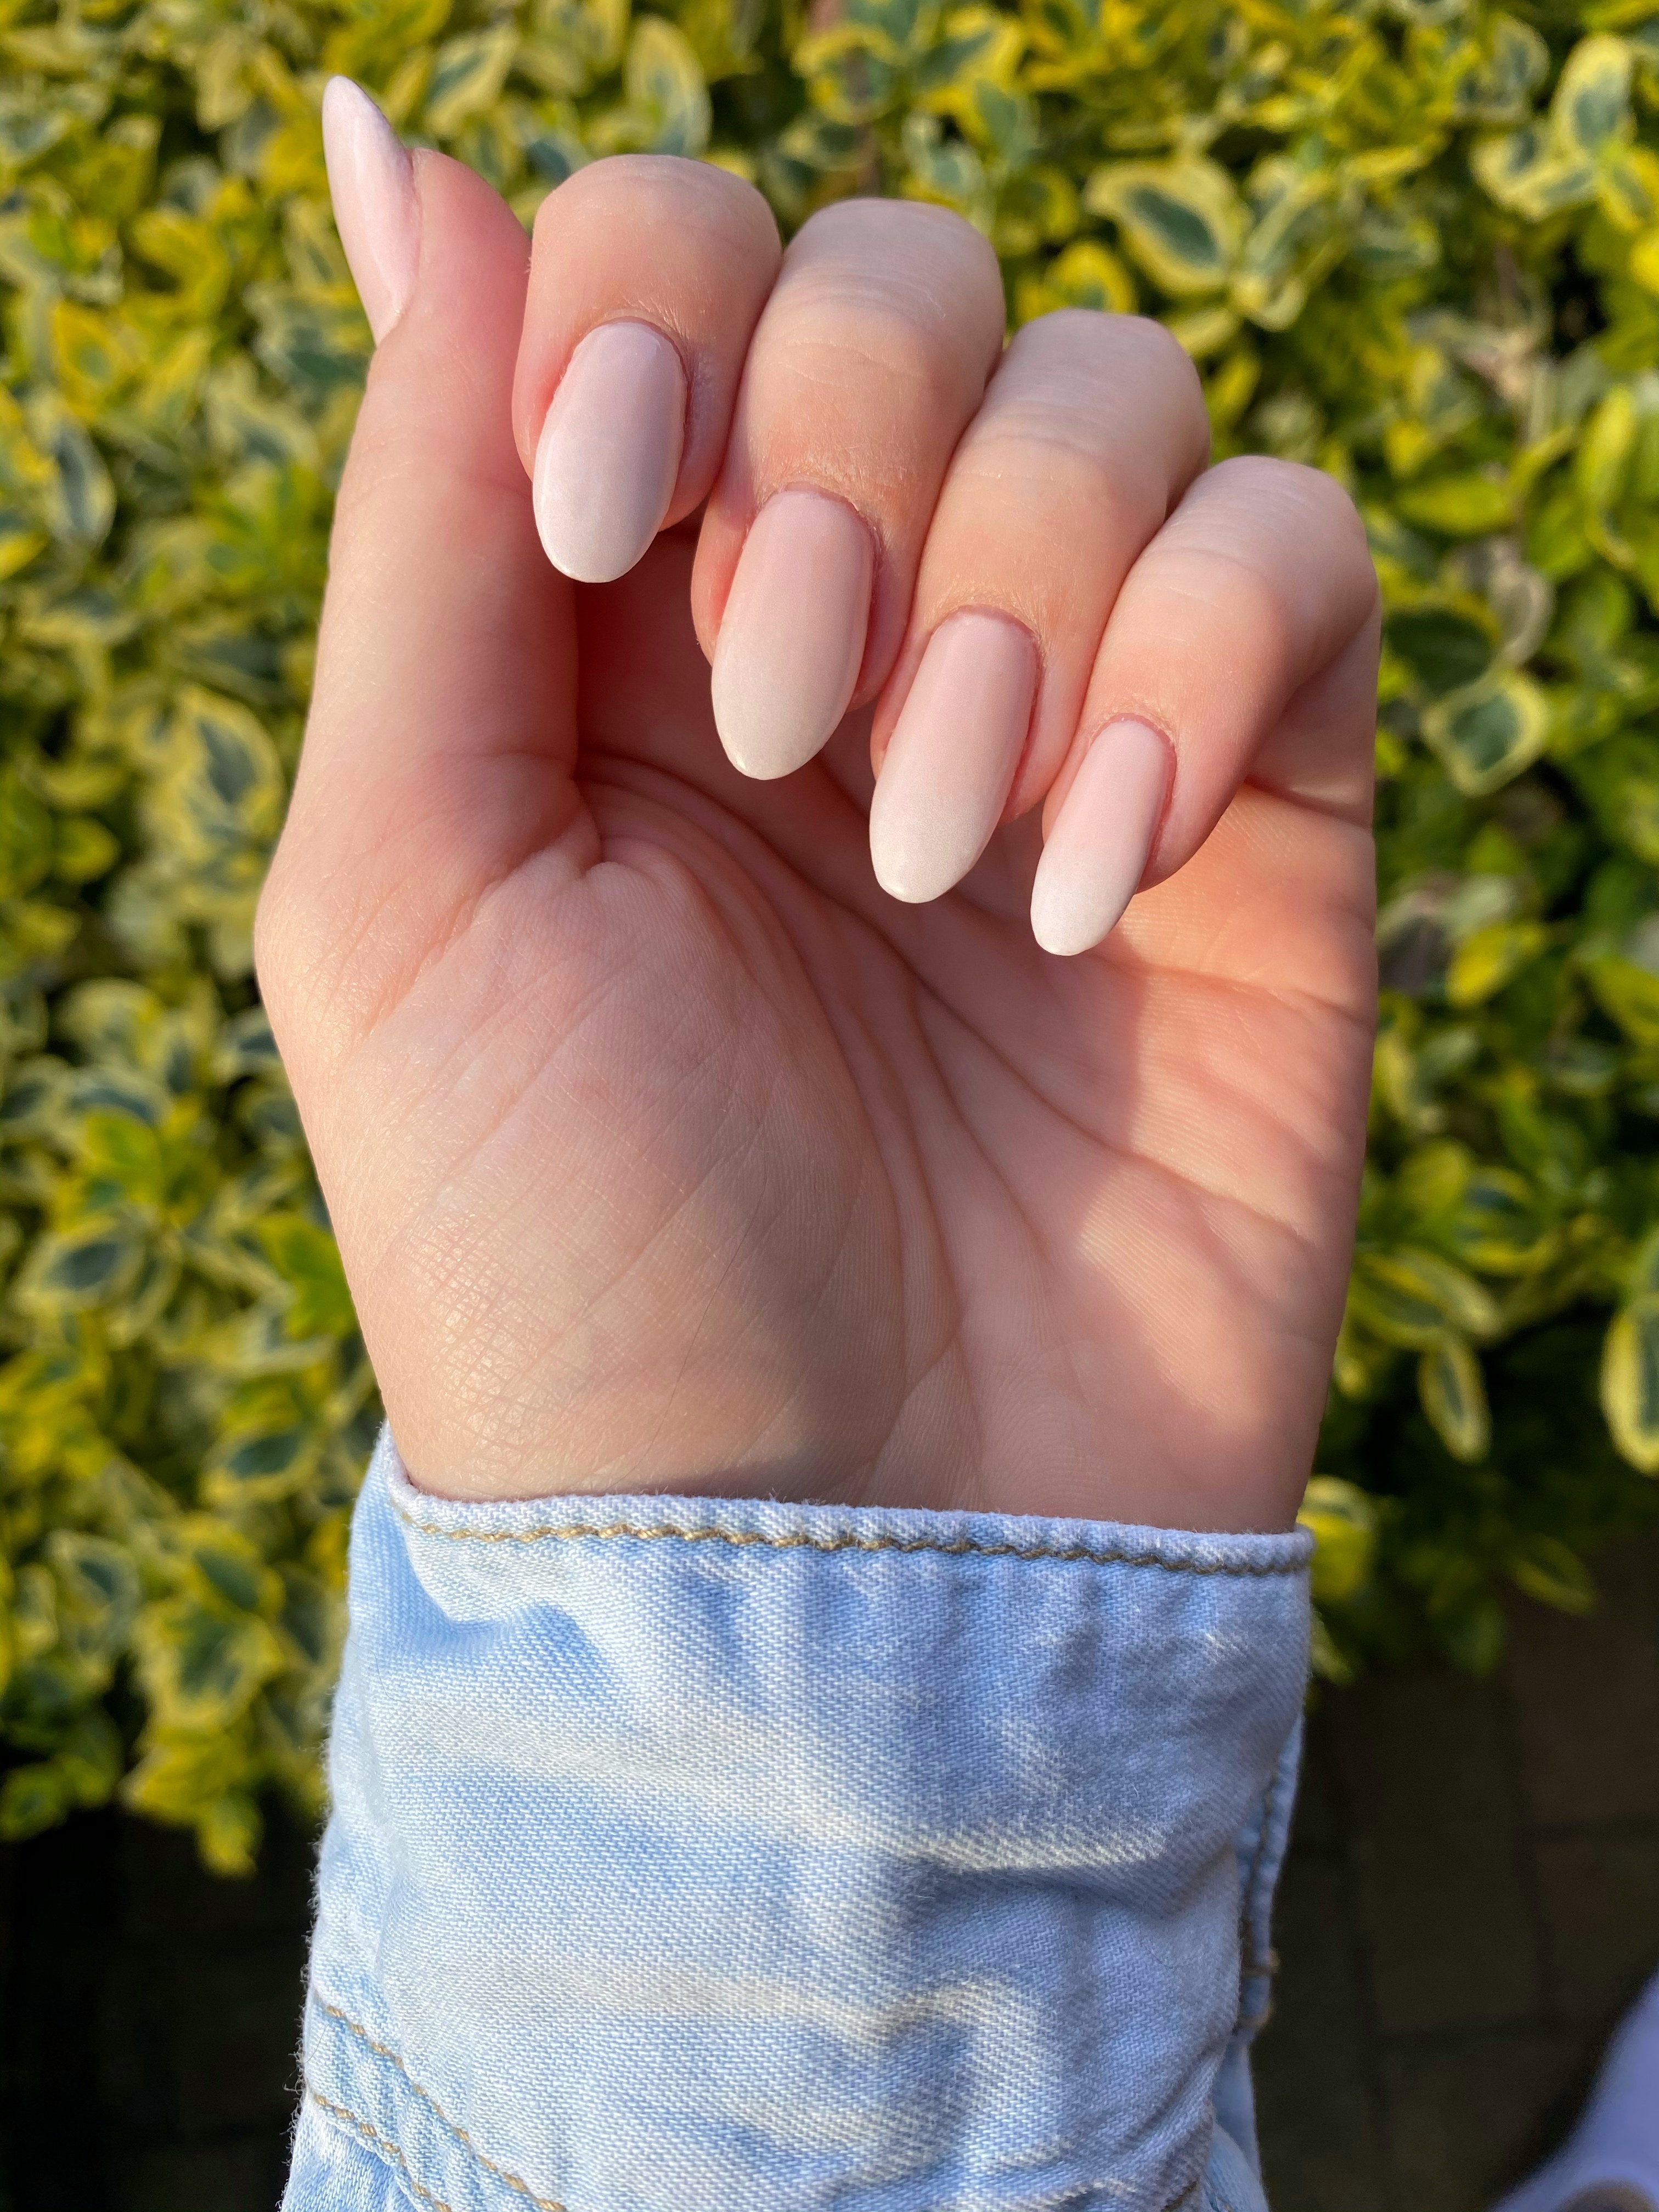 French fade manicure. | Source: Shutterstock